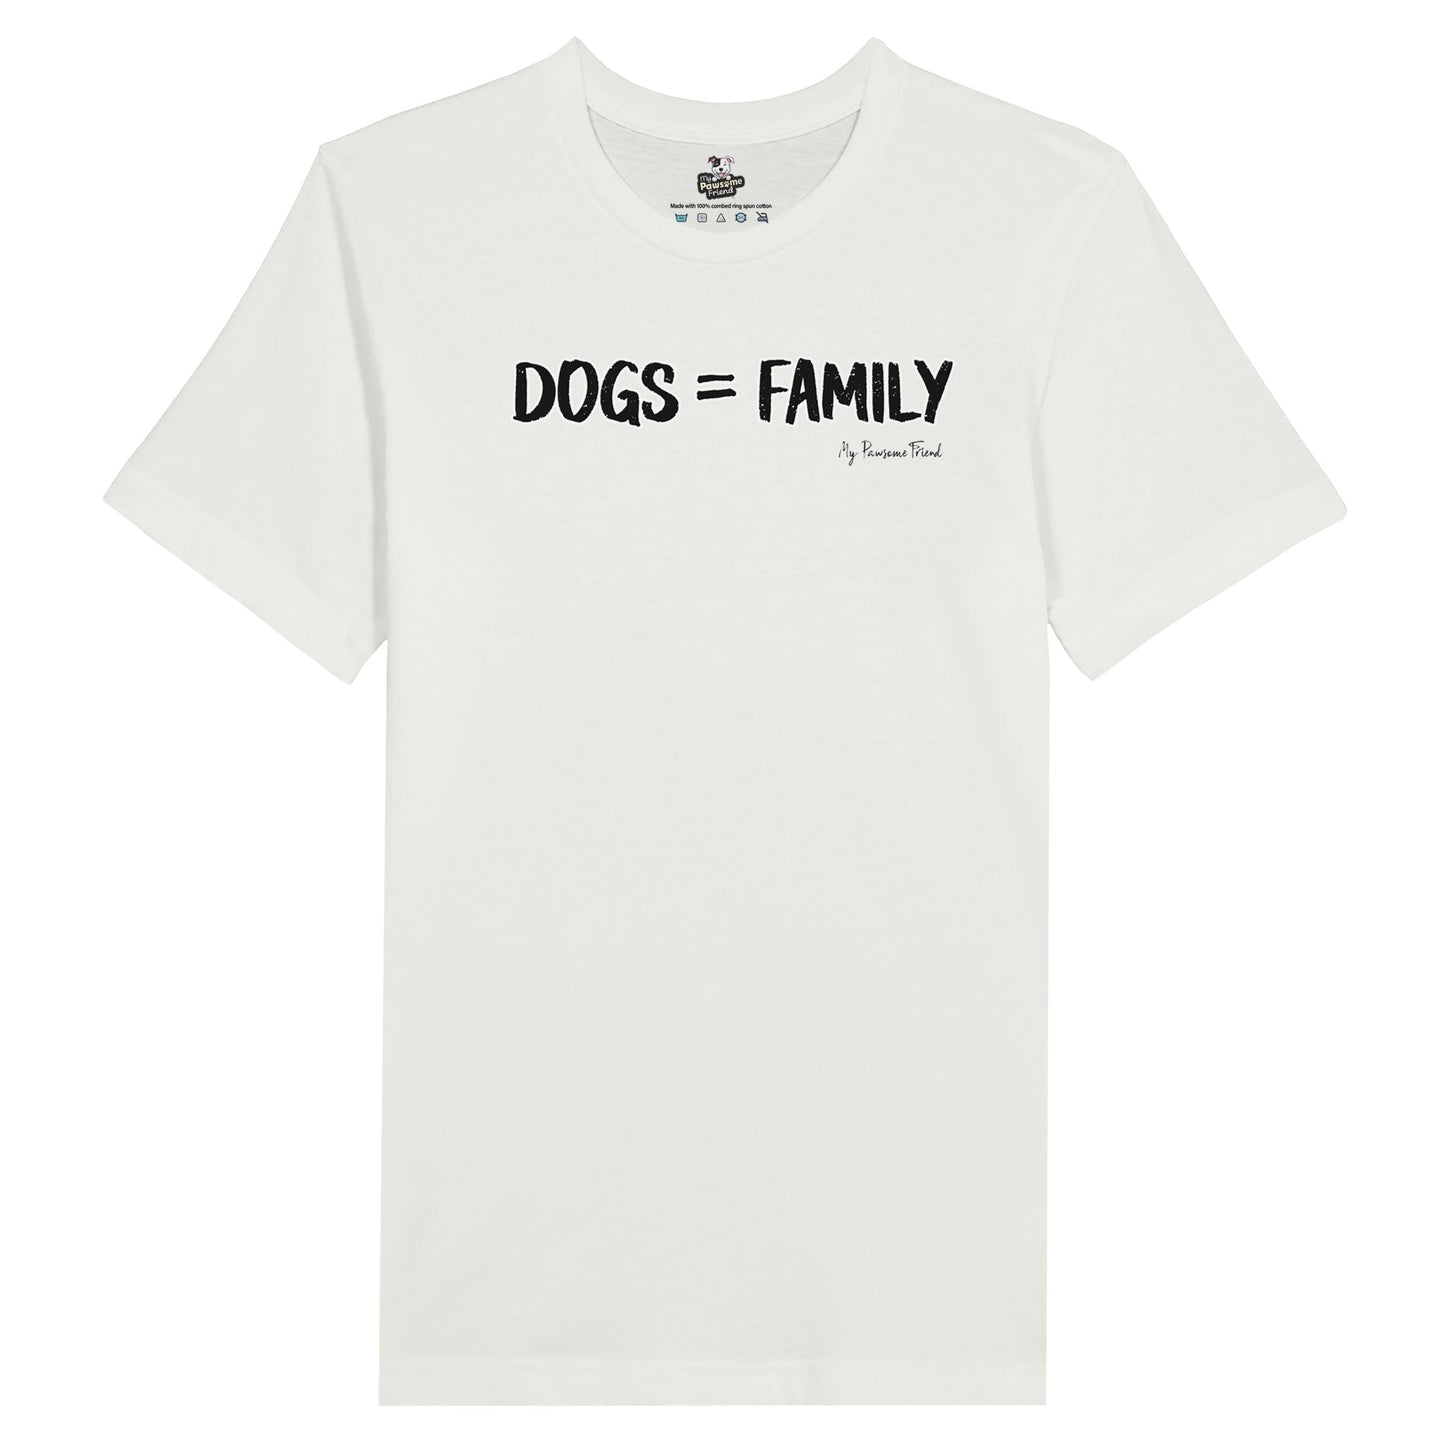 Unisex T-shirt with the message "Dogs = Family". The color of the unisex t-shirt is white